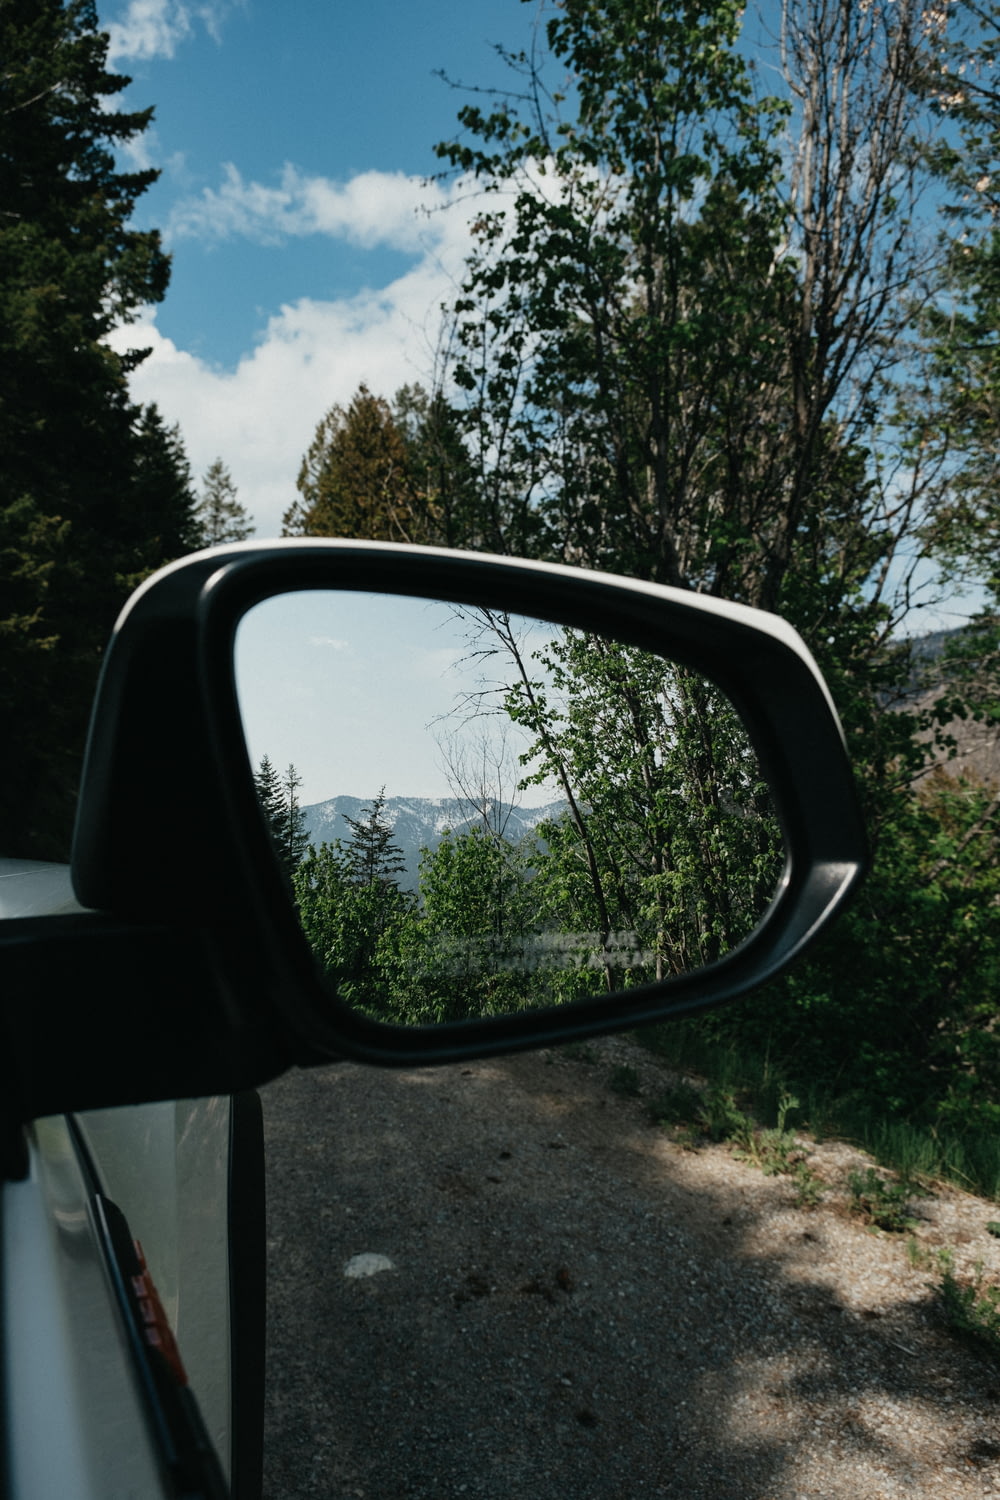 a rear view mirror on a car on a road